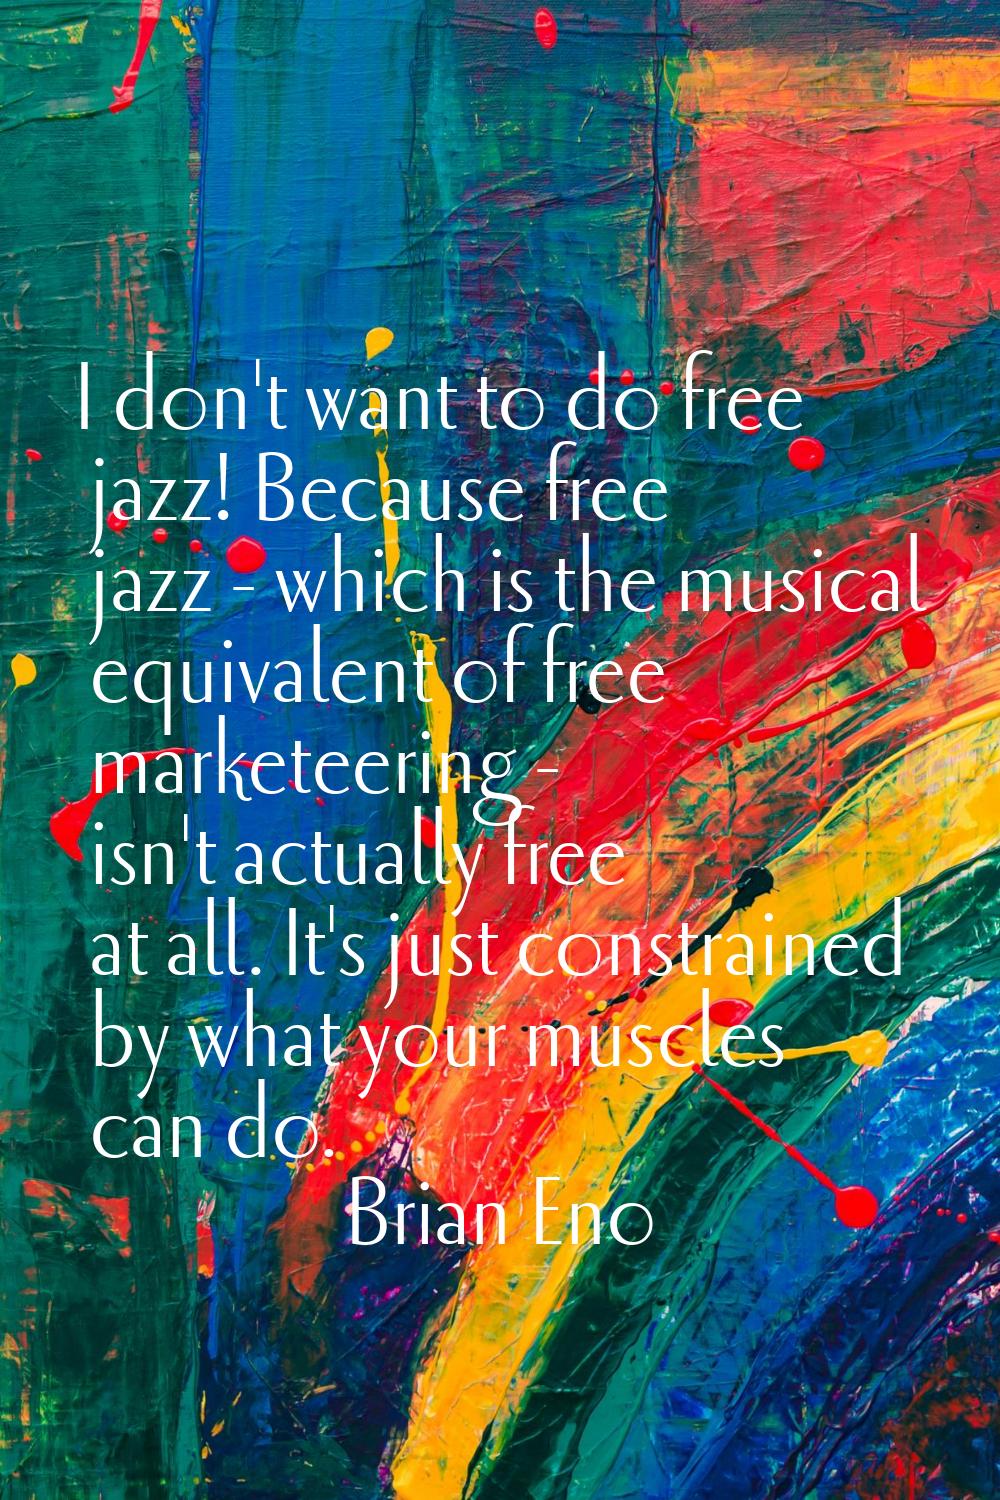 I don't want to do free jazz! Because free jazz - which is the musical equivalent of free marketeer